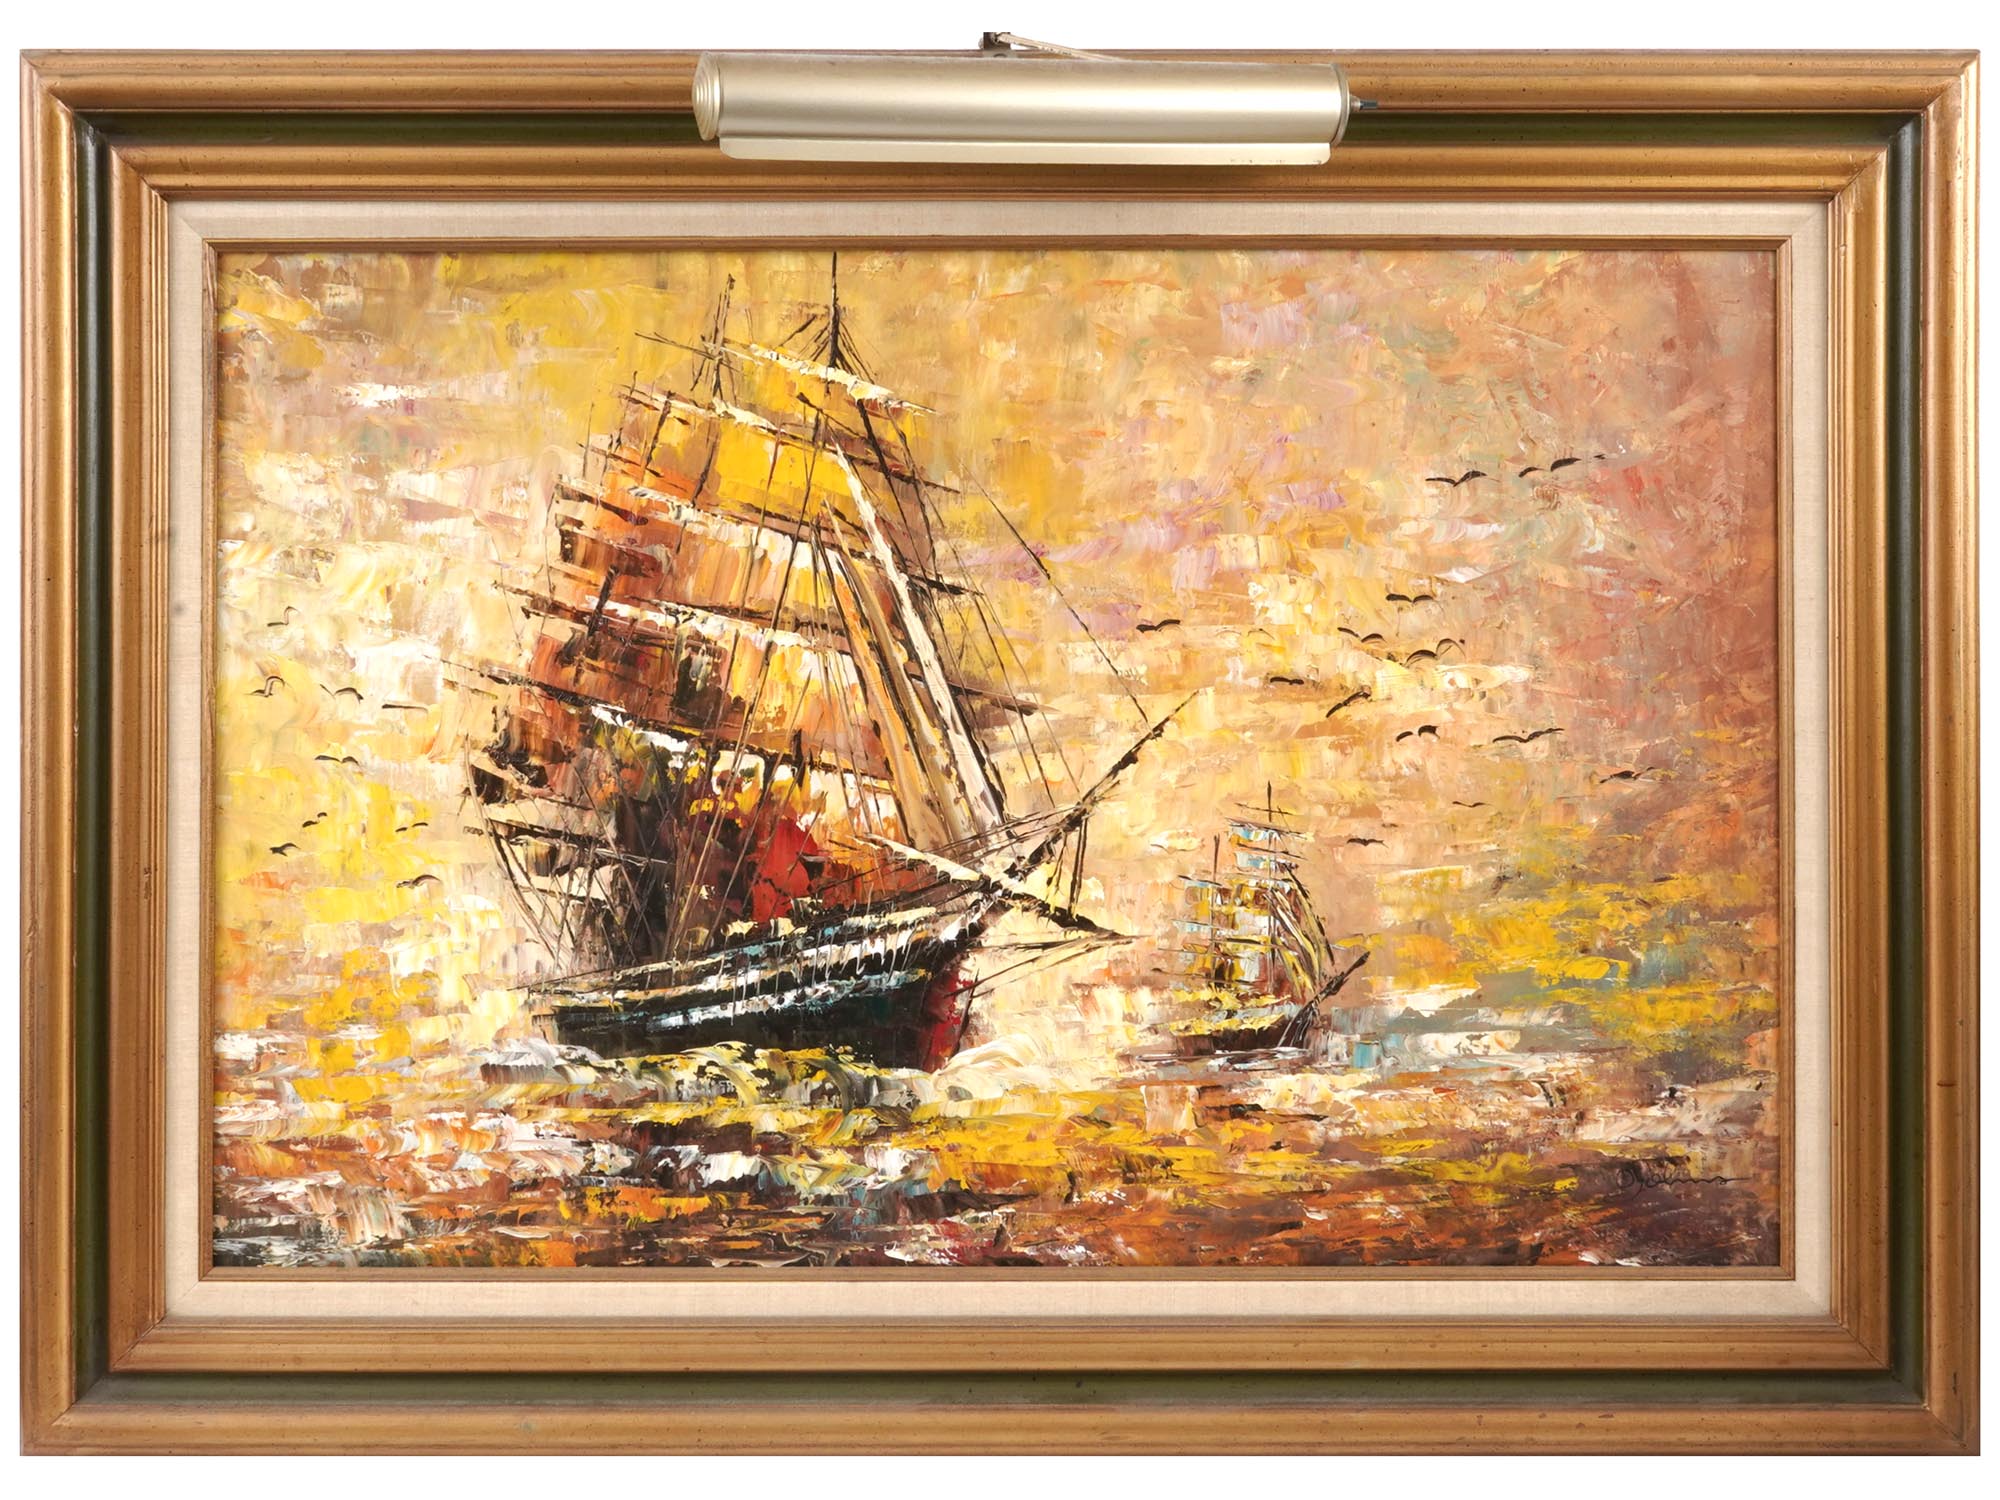 SEASCAPE WITH SAILING SHIP OIL PAINTING BY JOHNS PIC-0